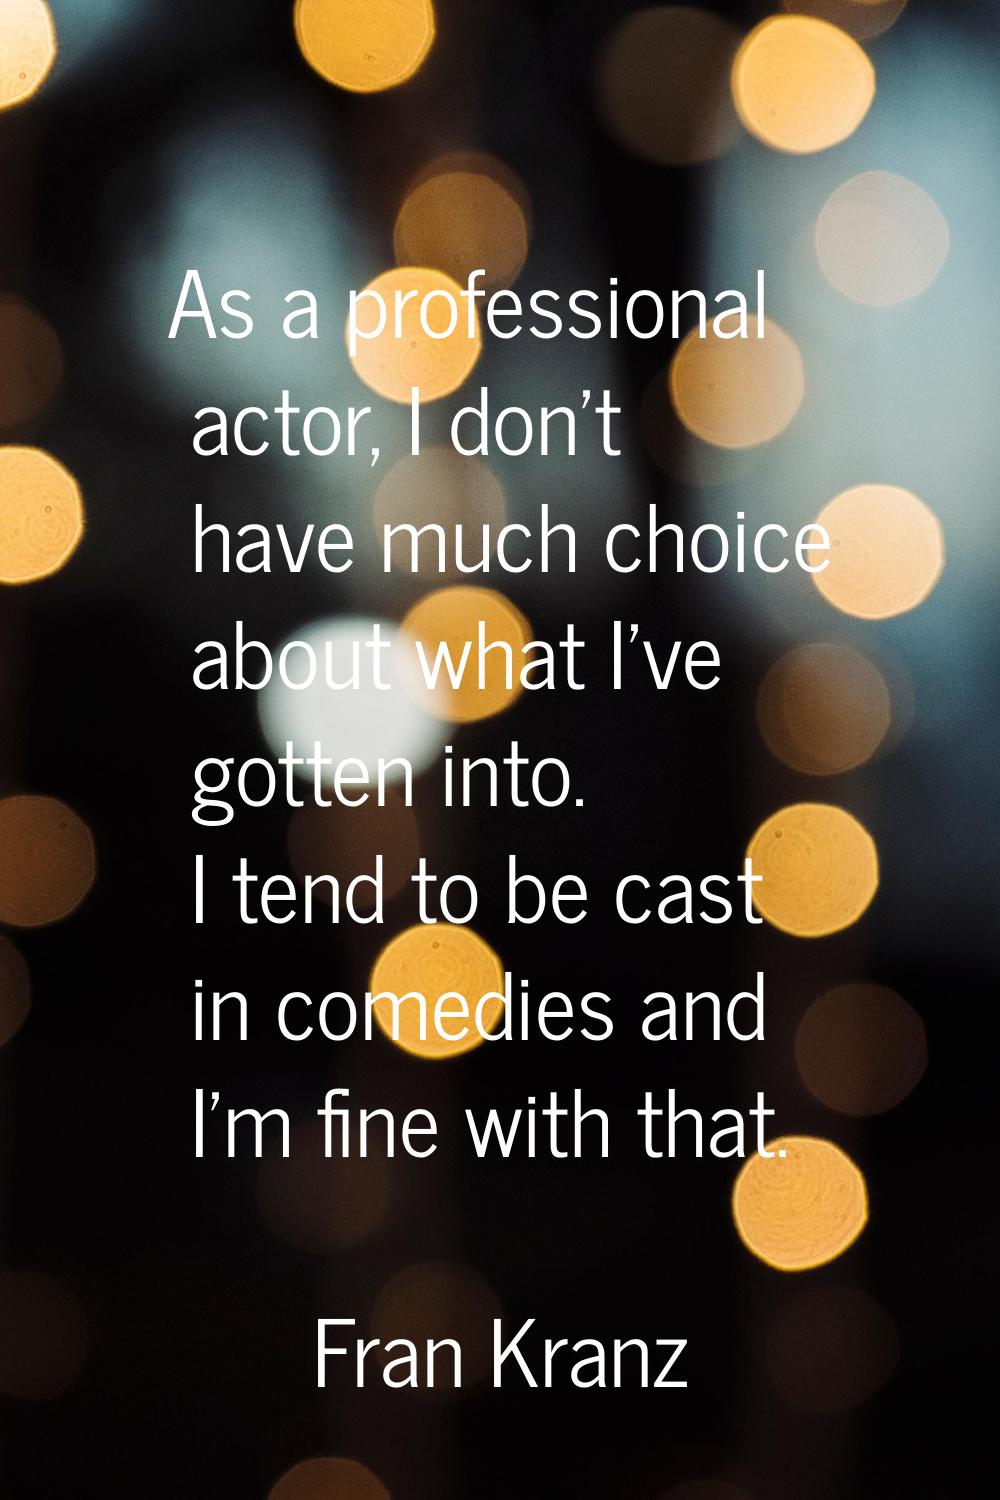 As a professional actor, I don't have much choice about what I've gotten into. I tend to be cast in